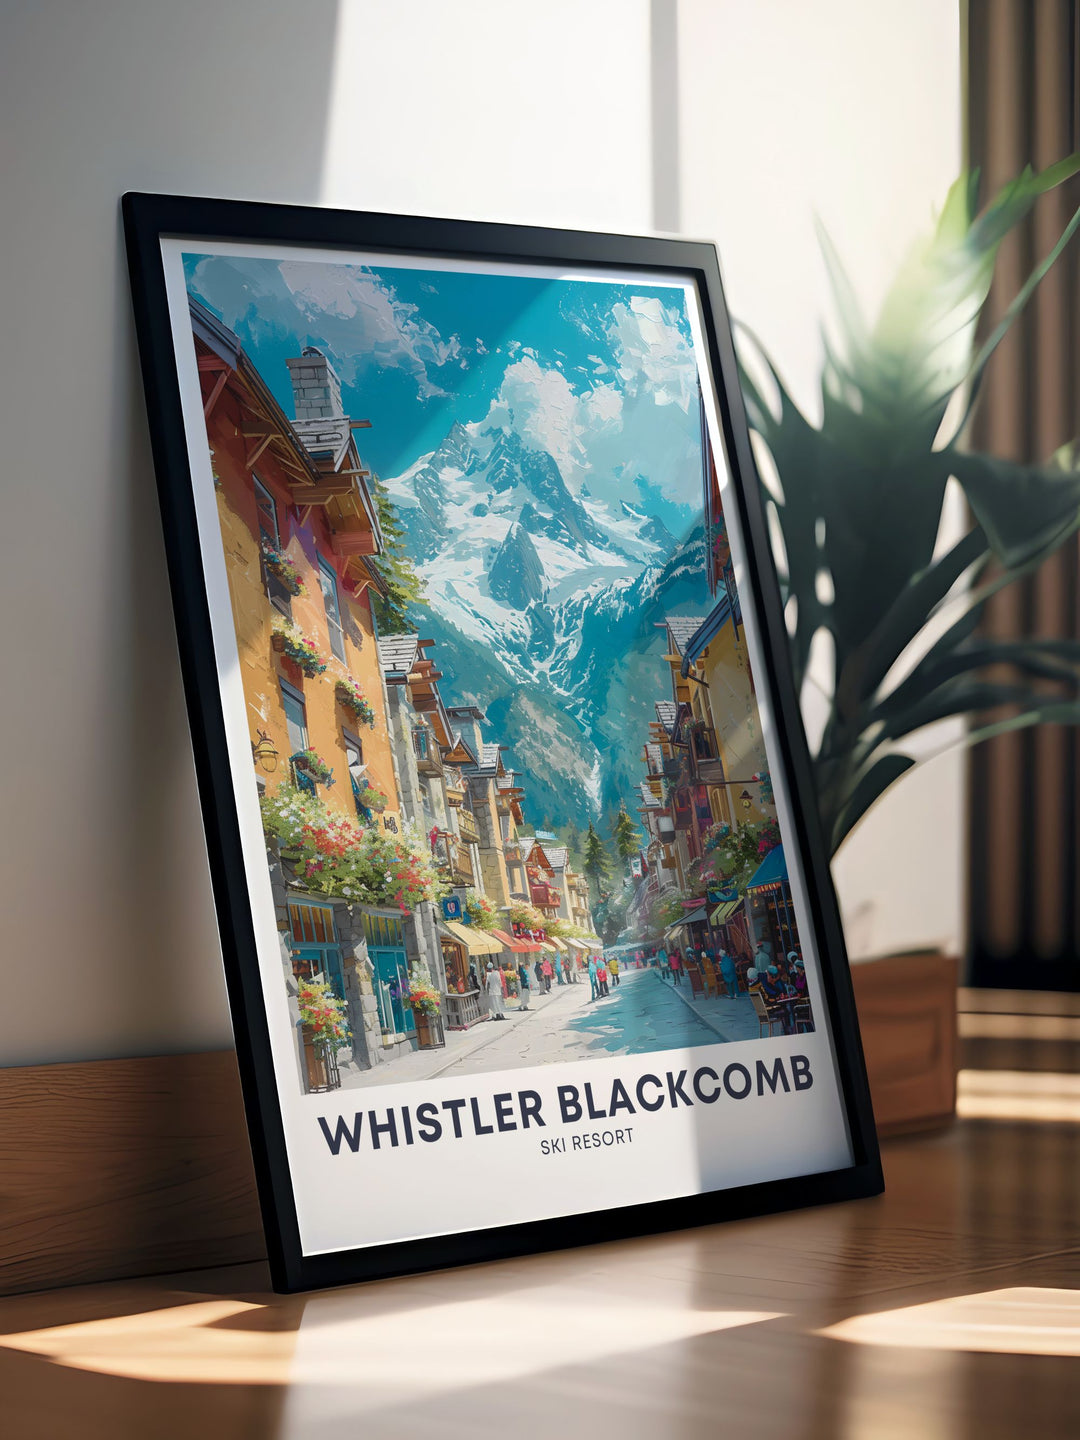 Whistler village gifts featuring vintage prints of the iconic Whistler Ski Resort, making thoughtful and unique presents for friends and family who love skiing and snowboarding.